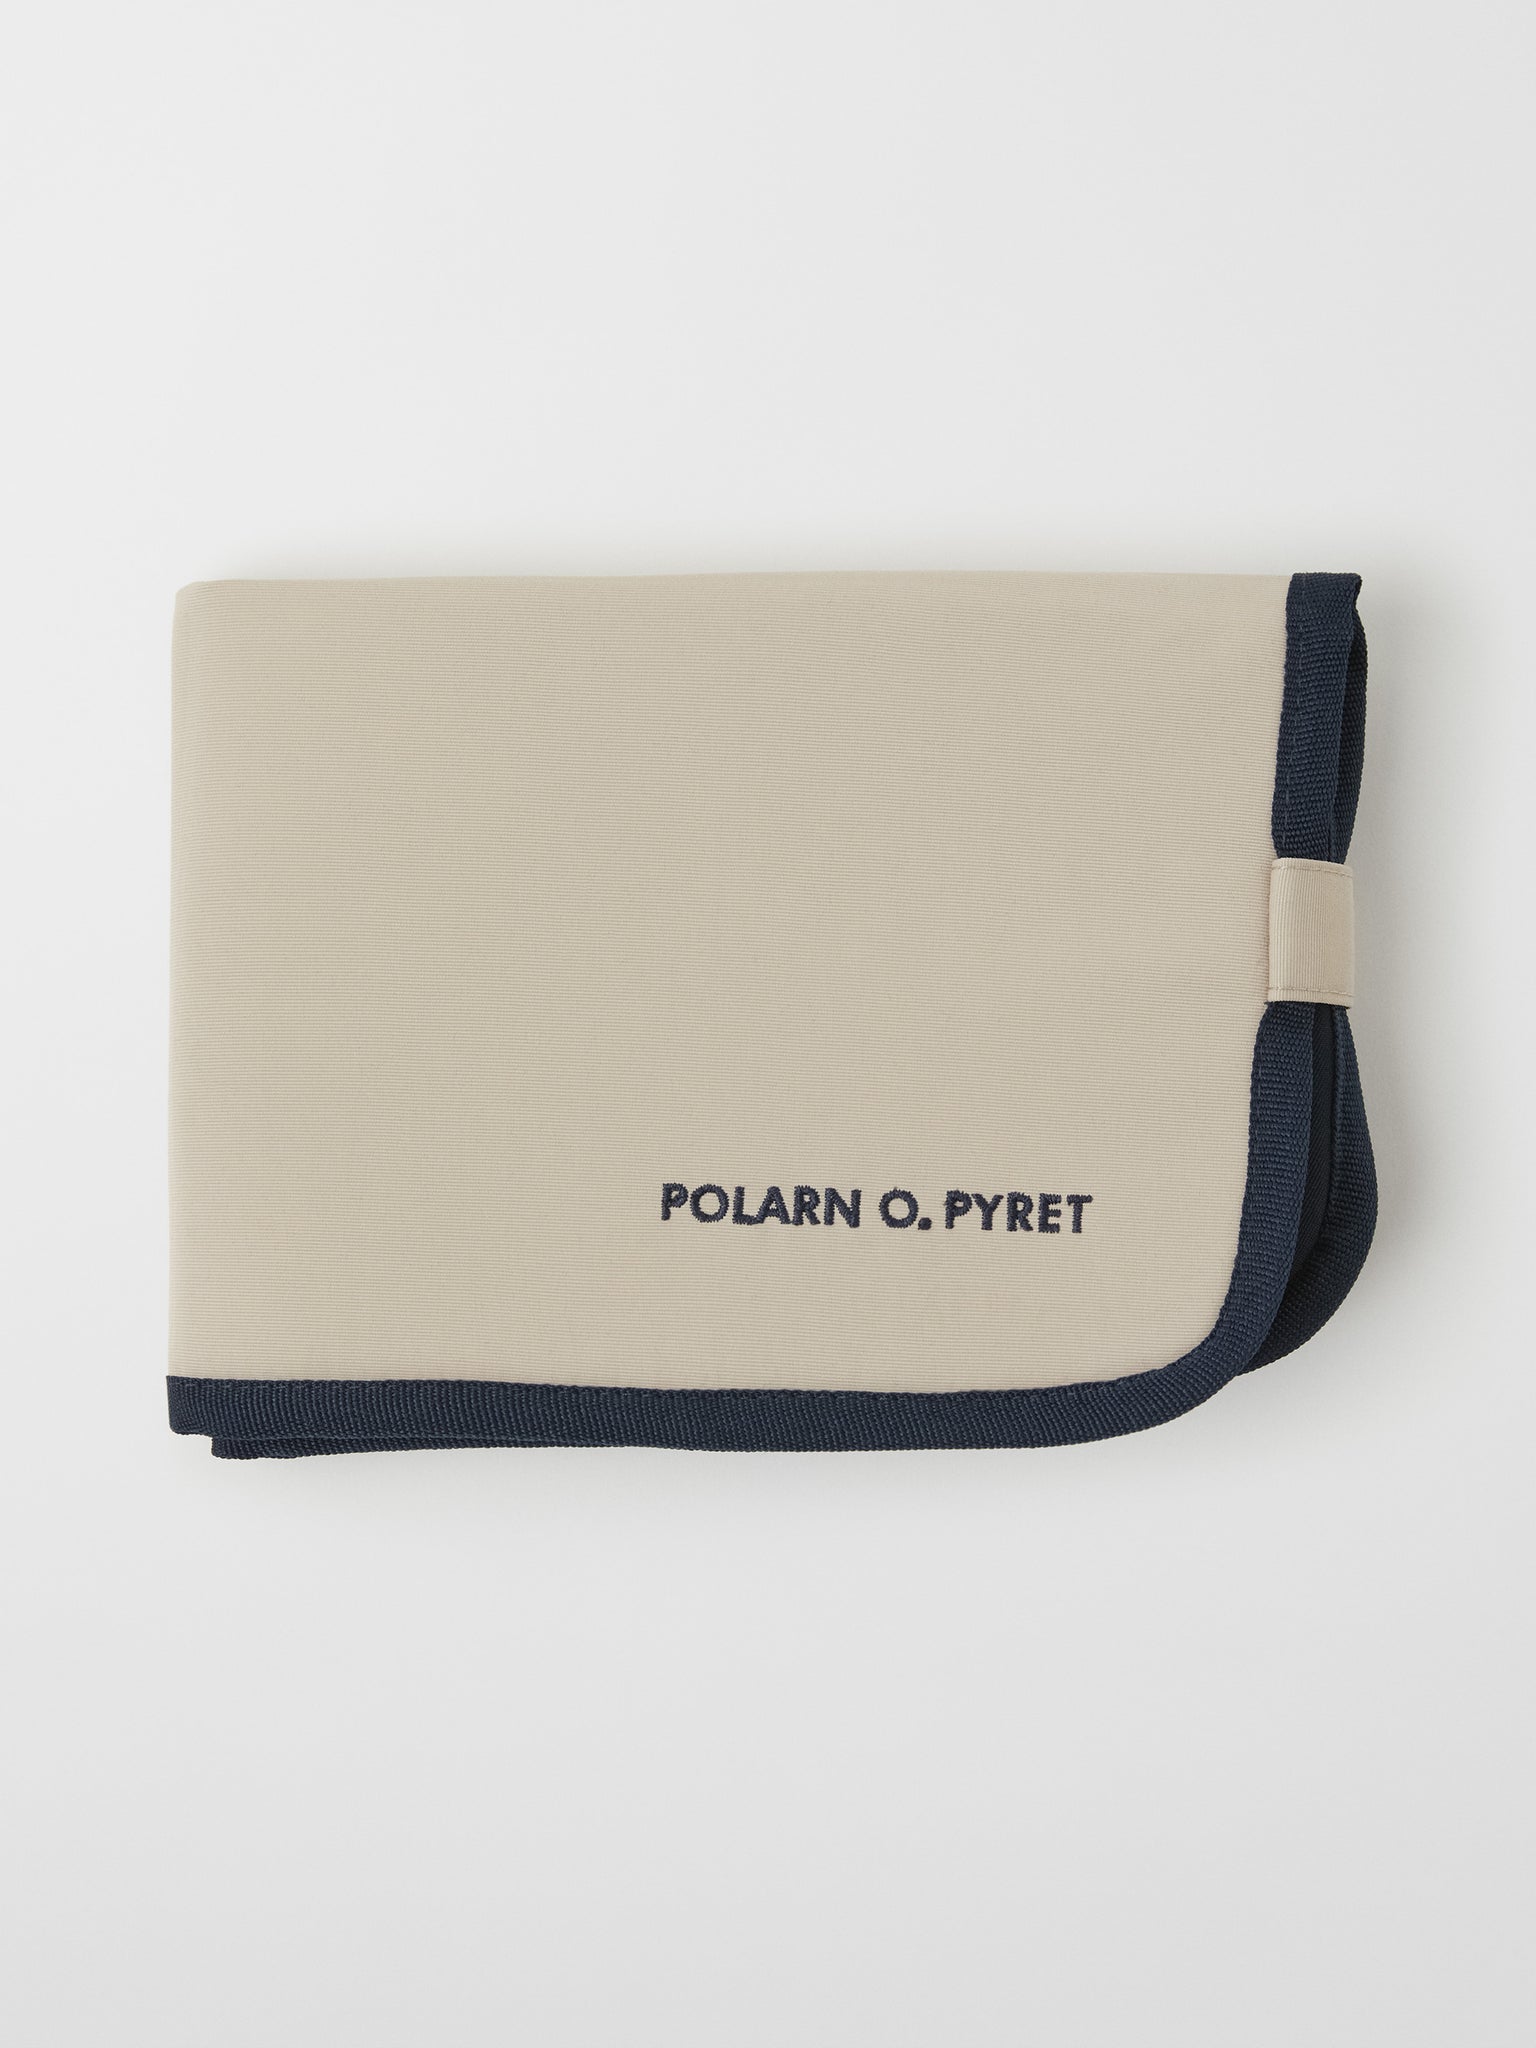 Beige Childrens Seat Cushion Pad from the Polarn O. Pyret outerwear collection. Ethically produced kids outerwear.